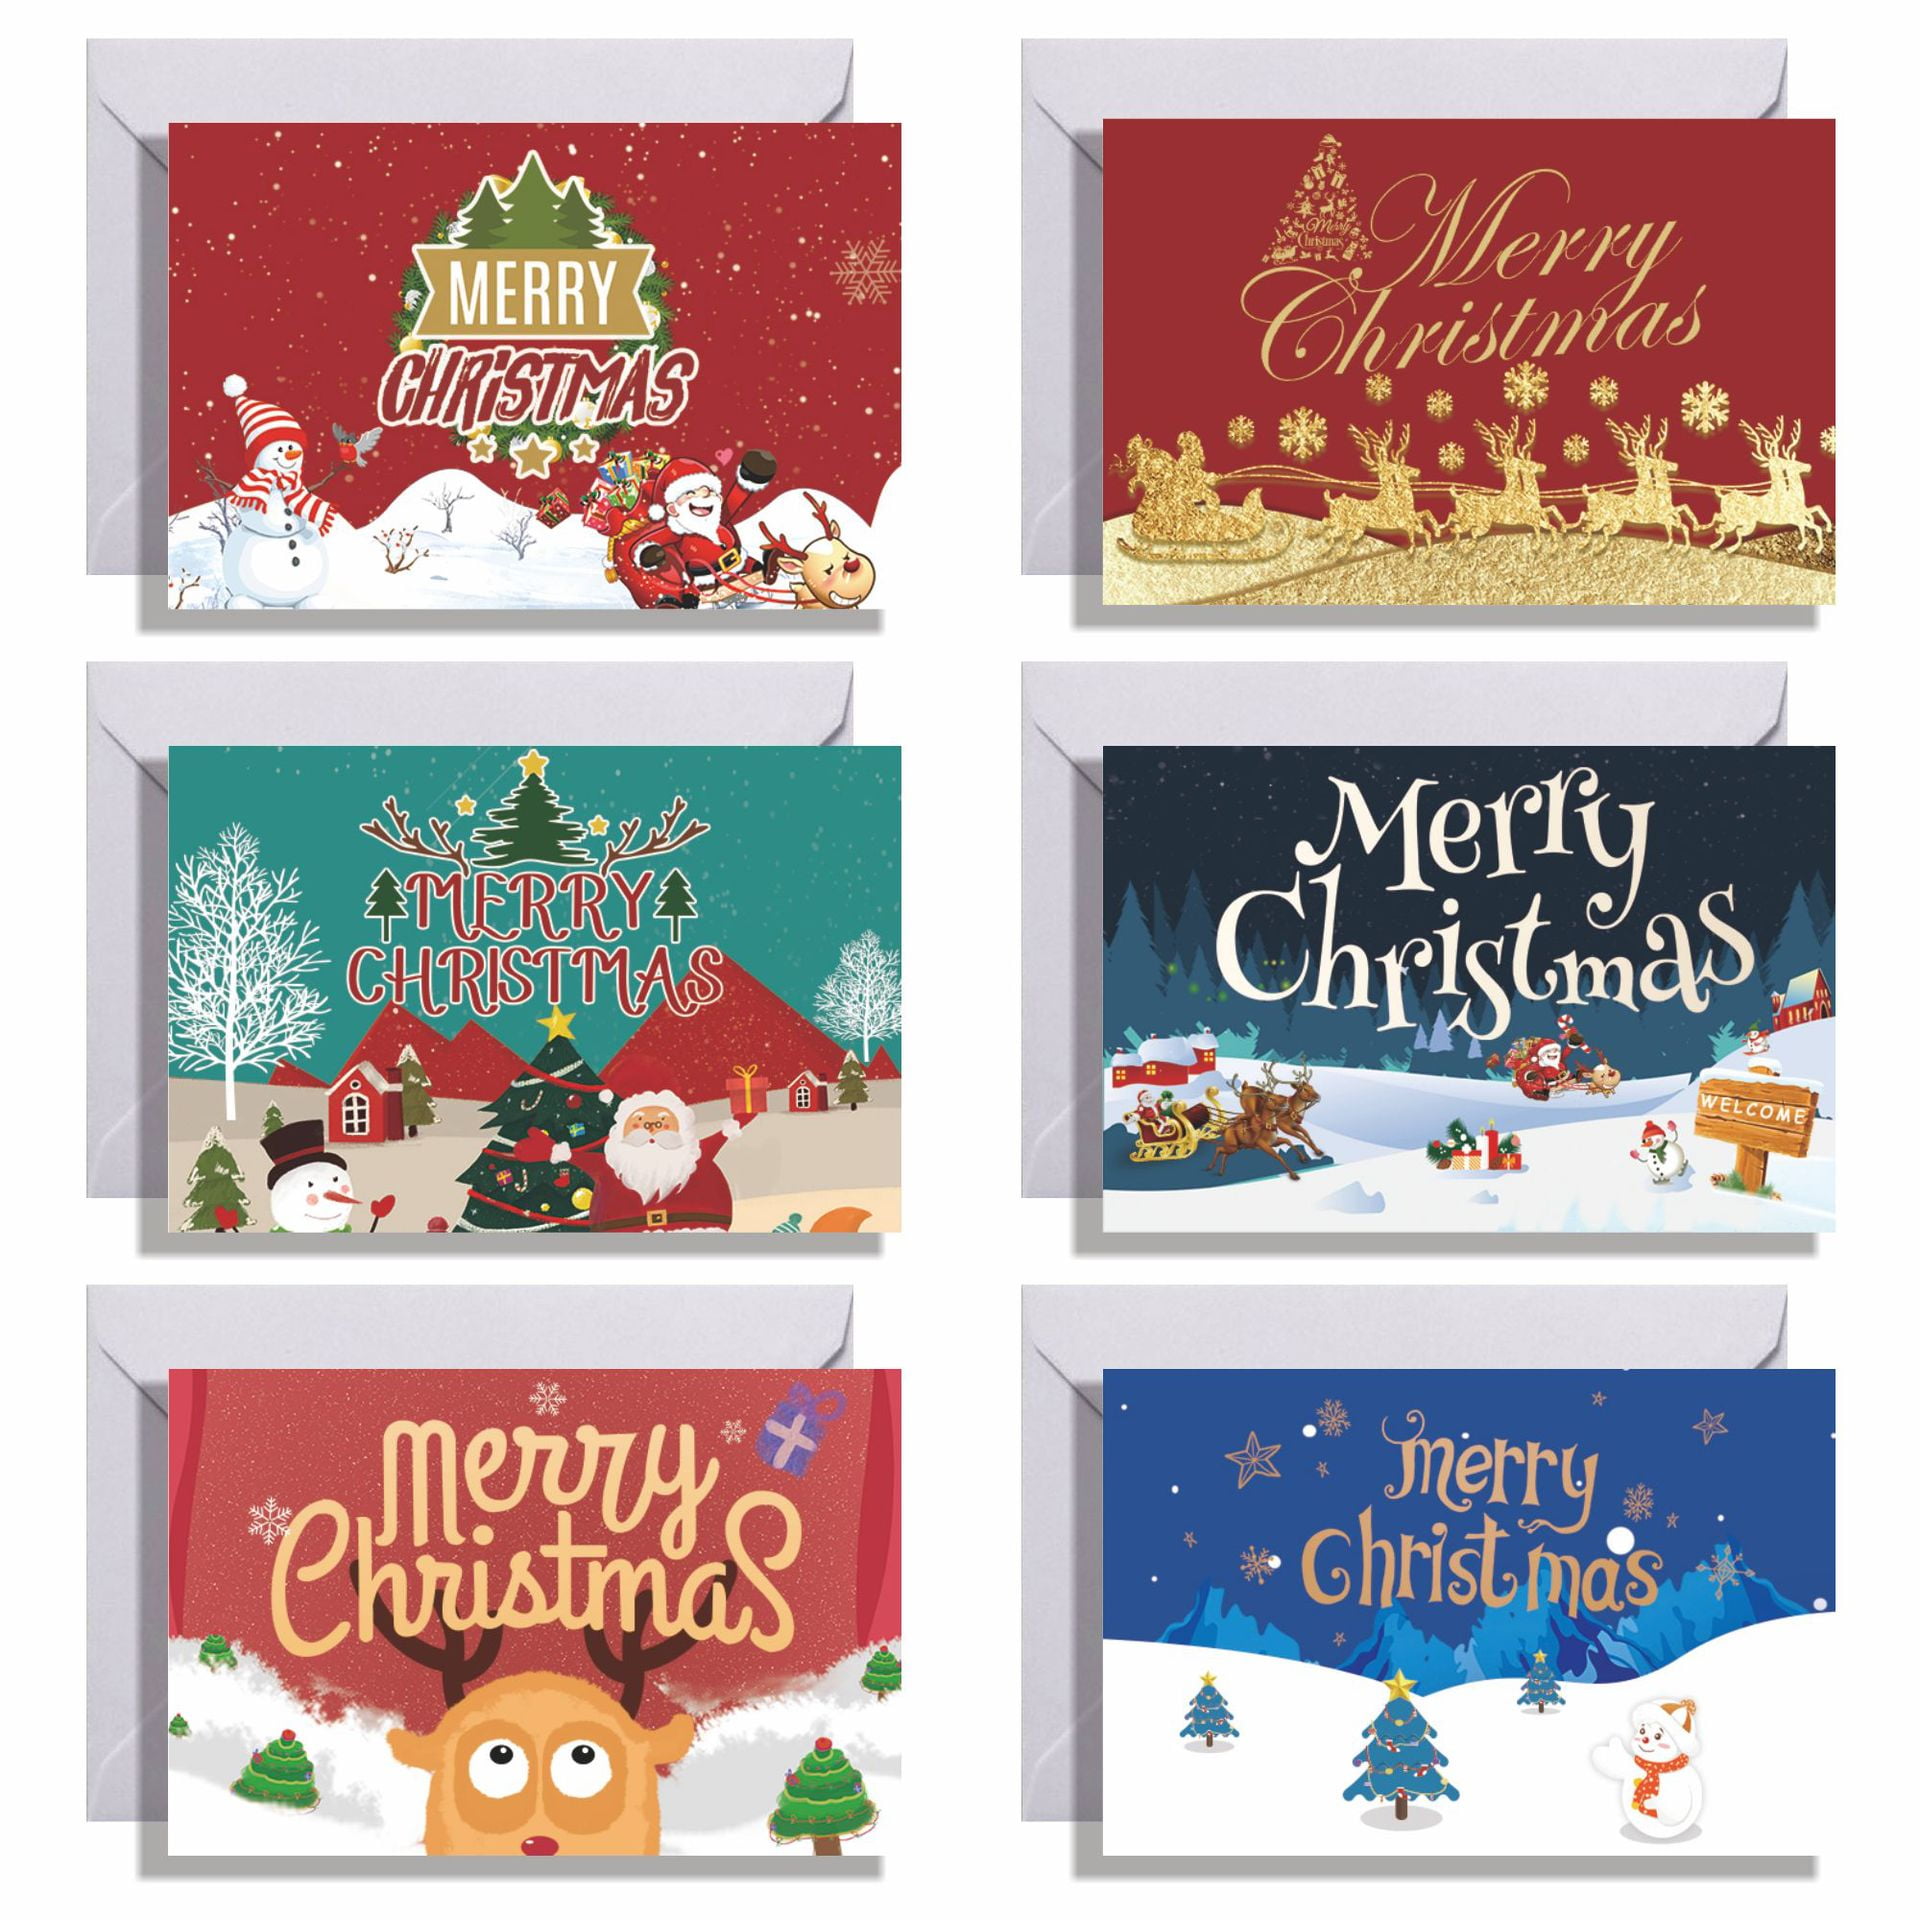 HCXIN Christmas greeting cards handmade DIY stereo cartoon greeting cards  folded small cards Thanksgiving New Year's Day New Year gift cards 